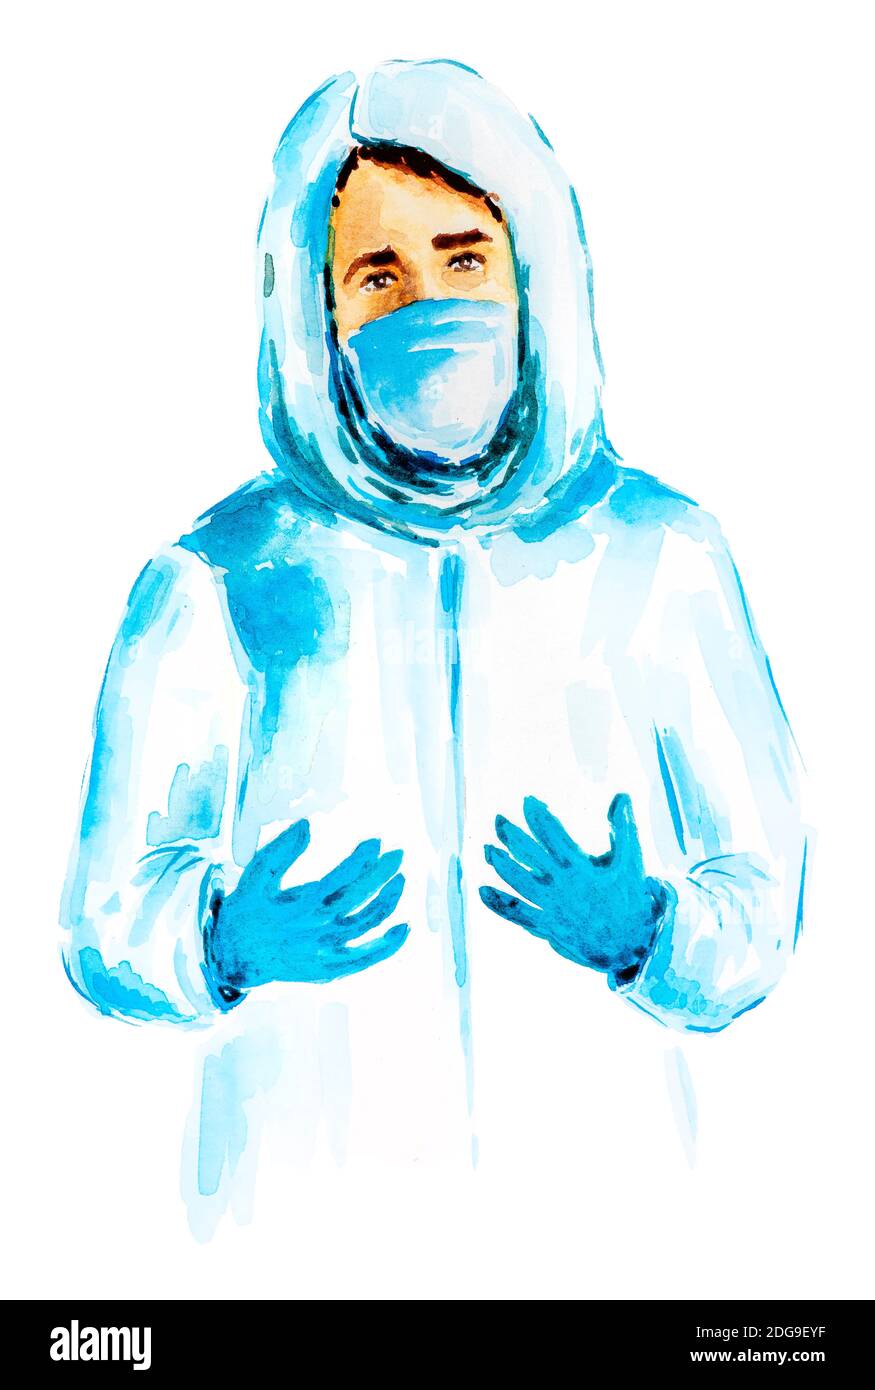 Doctor in a protective suit and mask. Medical personnel during the epidemic and pandemic of the coronavirus COVID-19. Hand-drawn in watercolor, Isolat Stock Photo